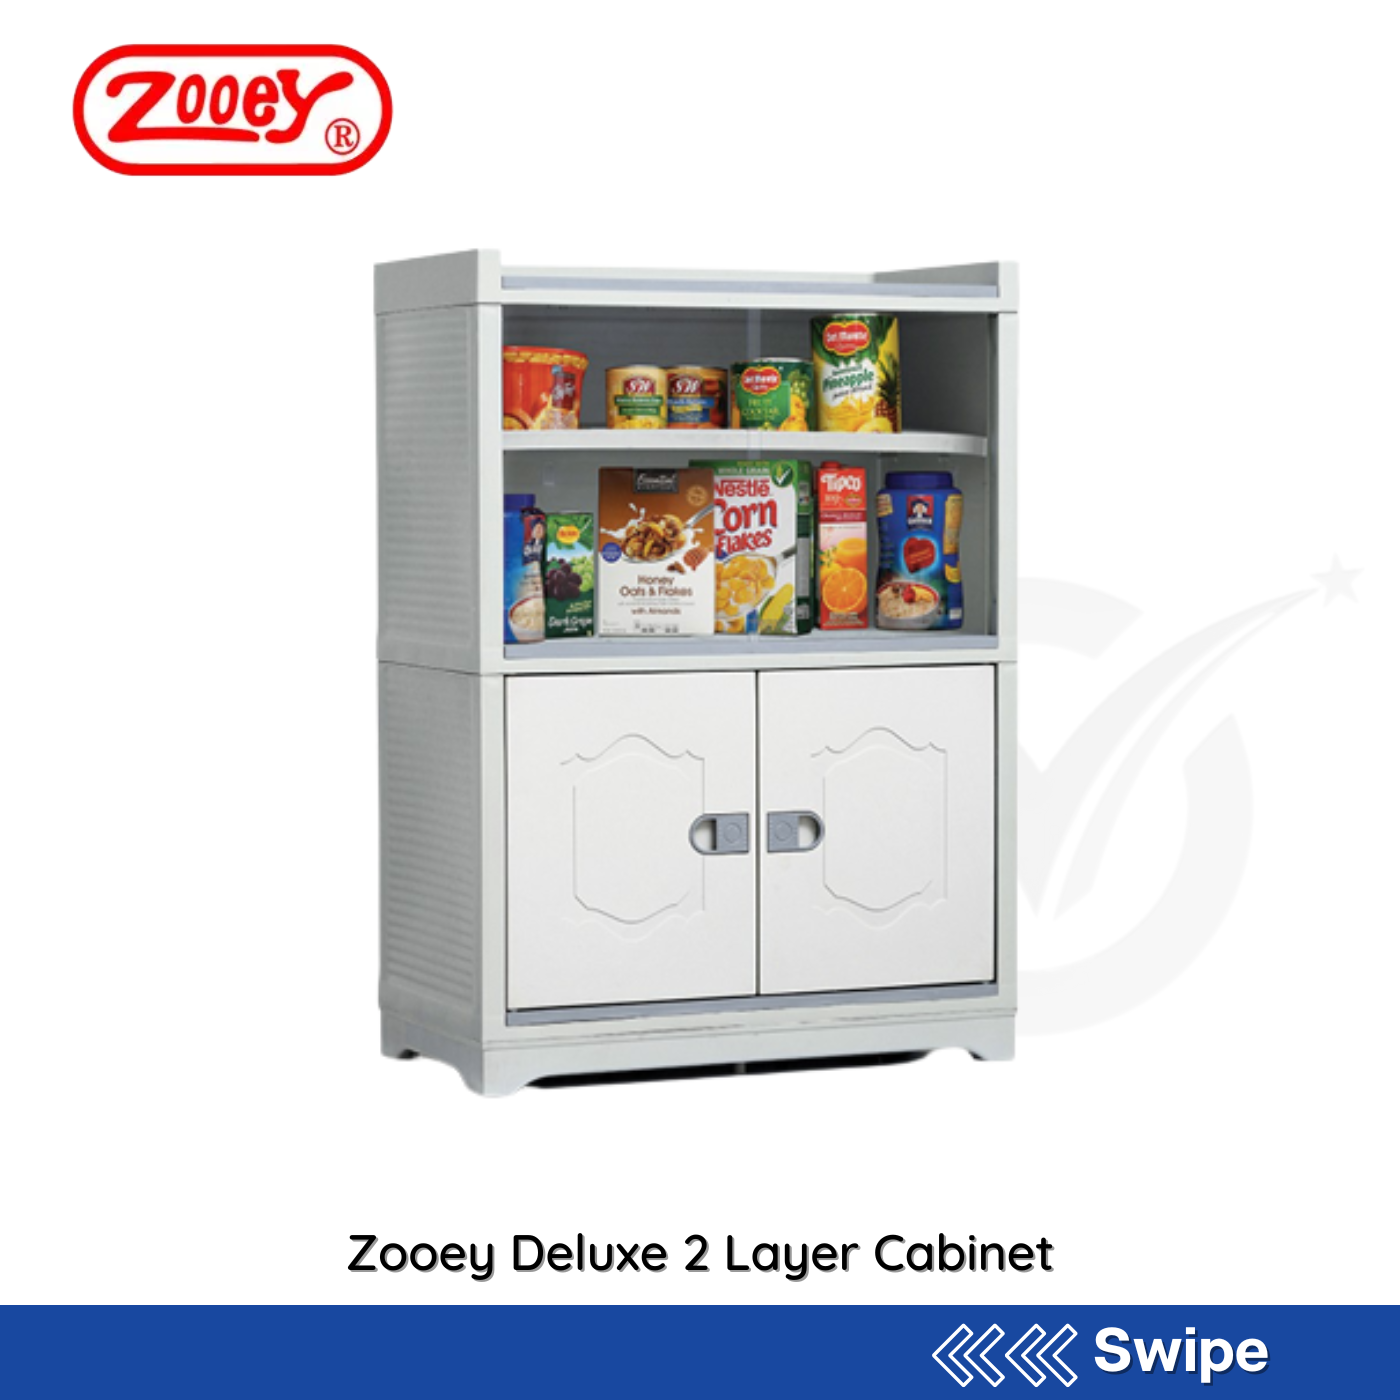 Zooey Deluxe 2 Layer Cabinets - People's Choice Marketing